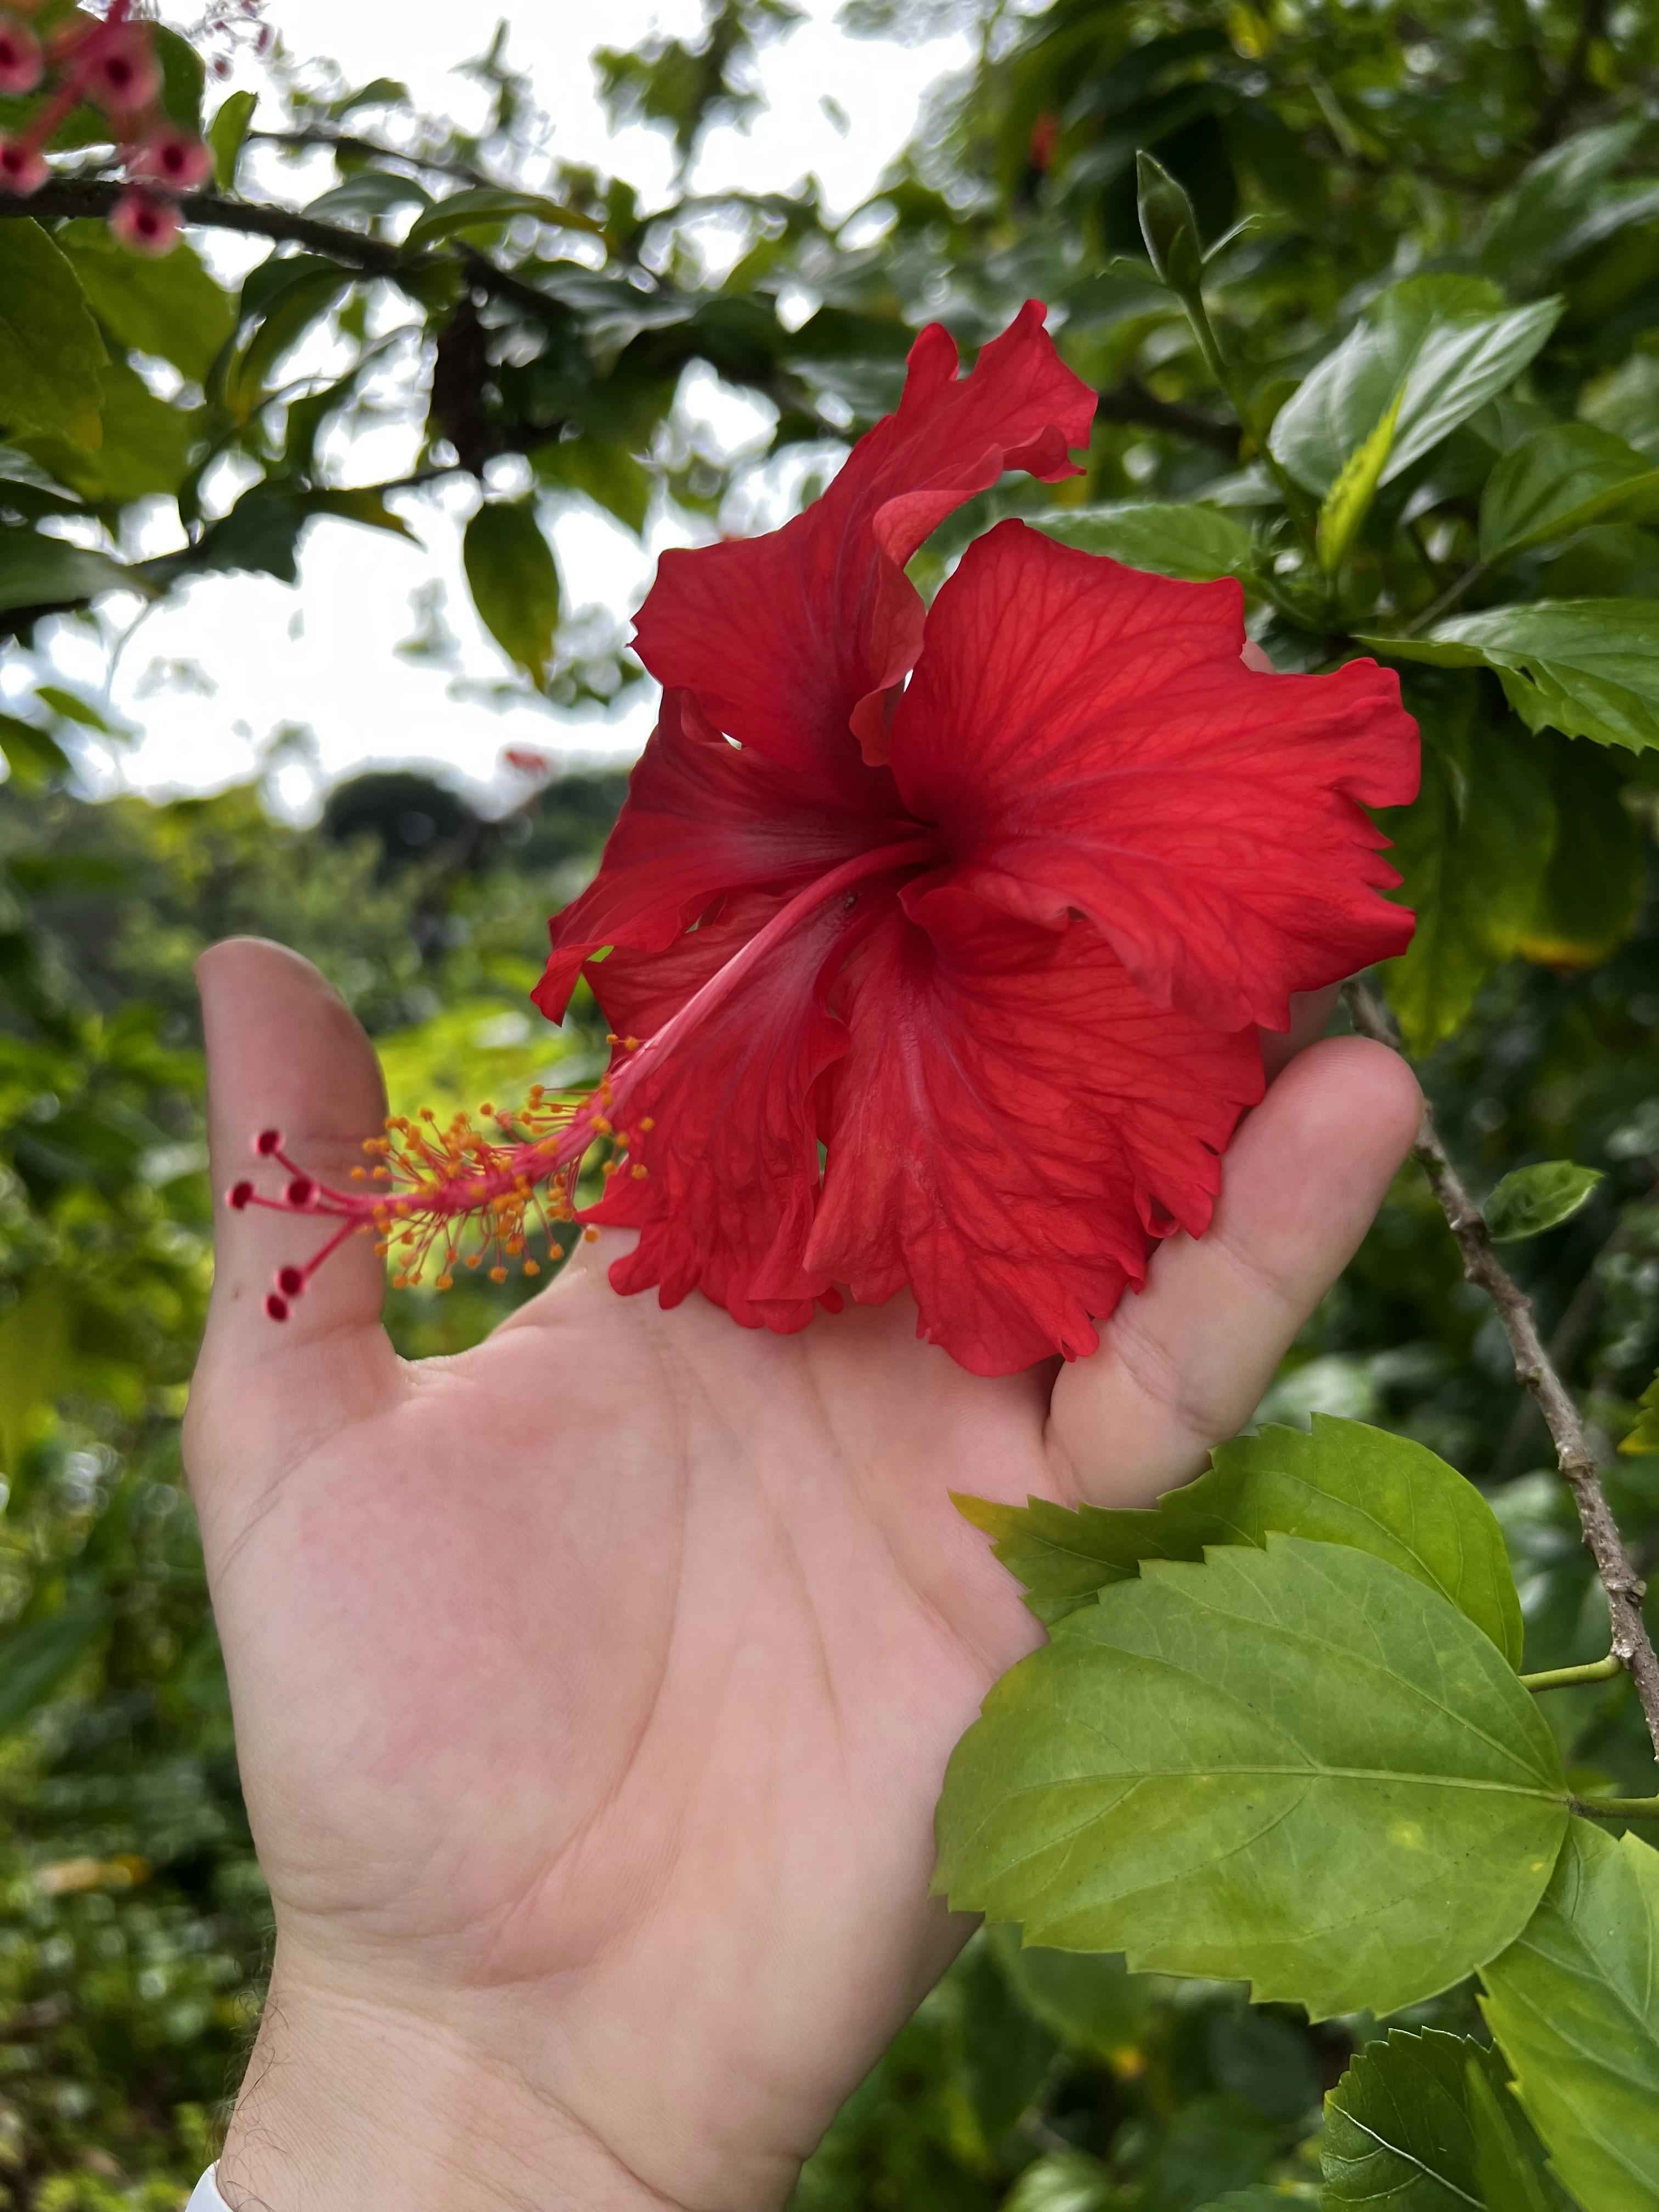 Picture of an Amapola flower